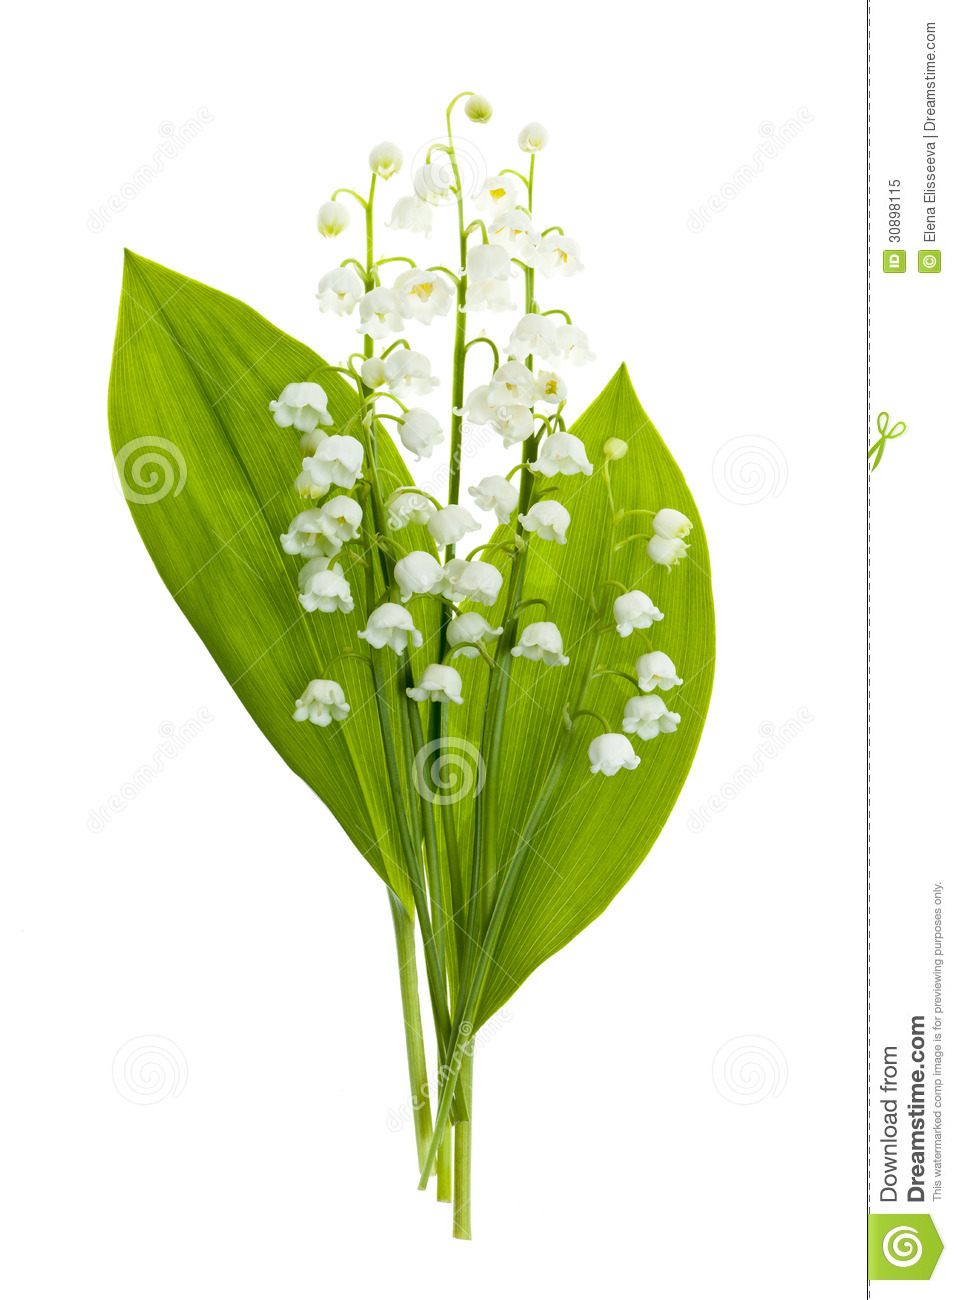 Lily Of The Valley Clipart.